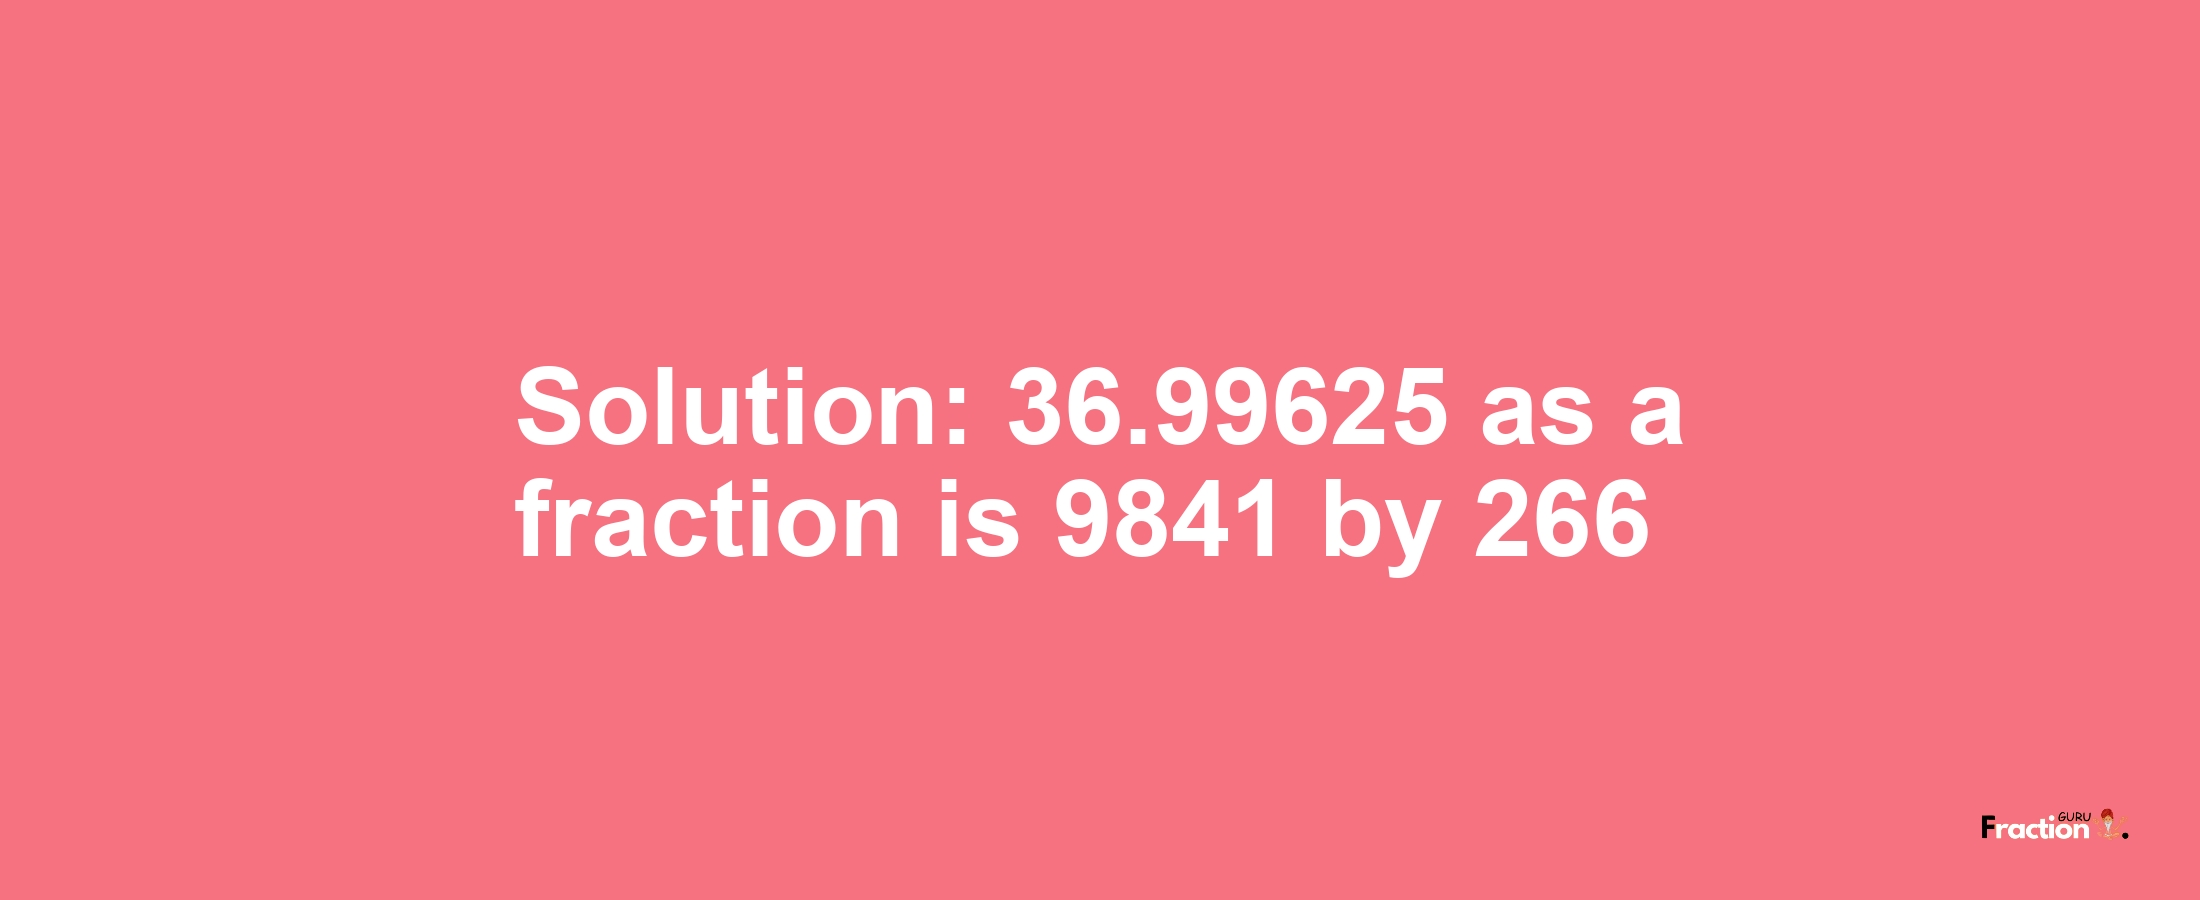 Solution:36.99625 as a fraction is 9841/266